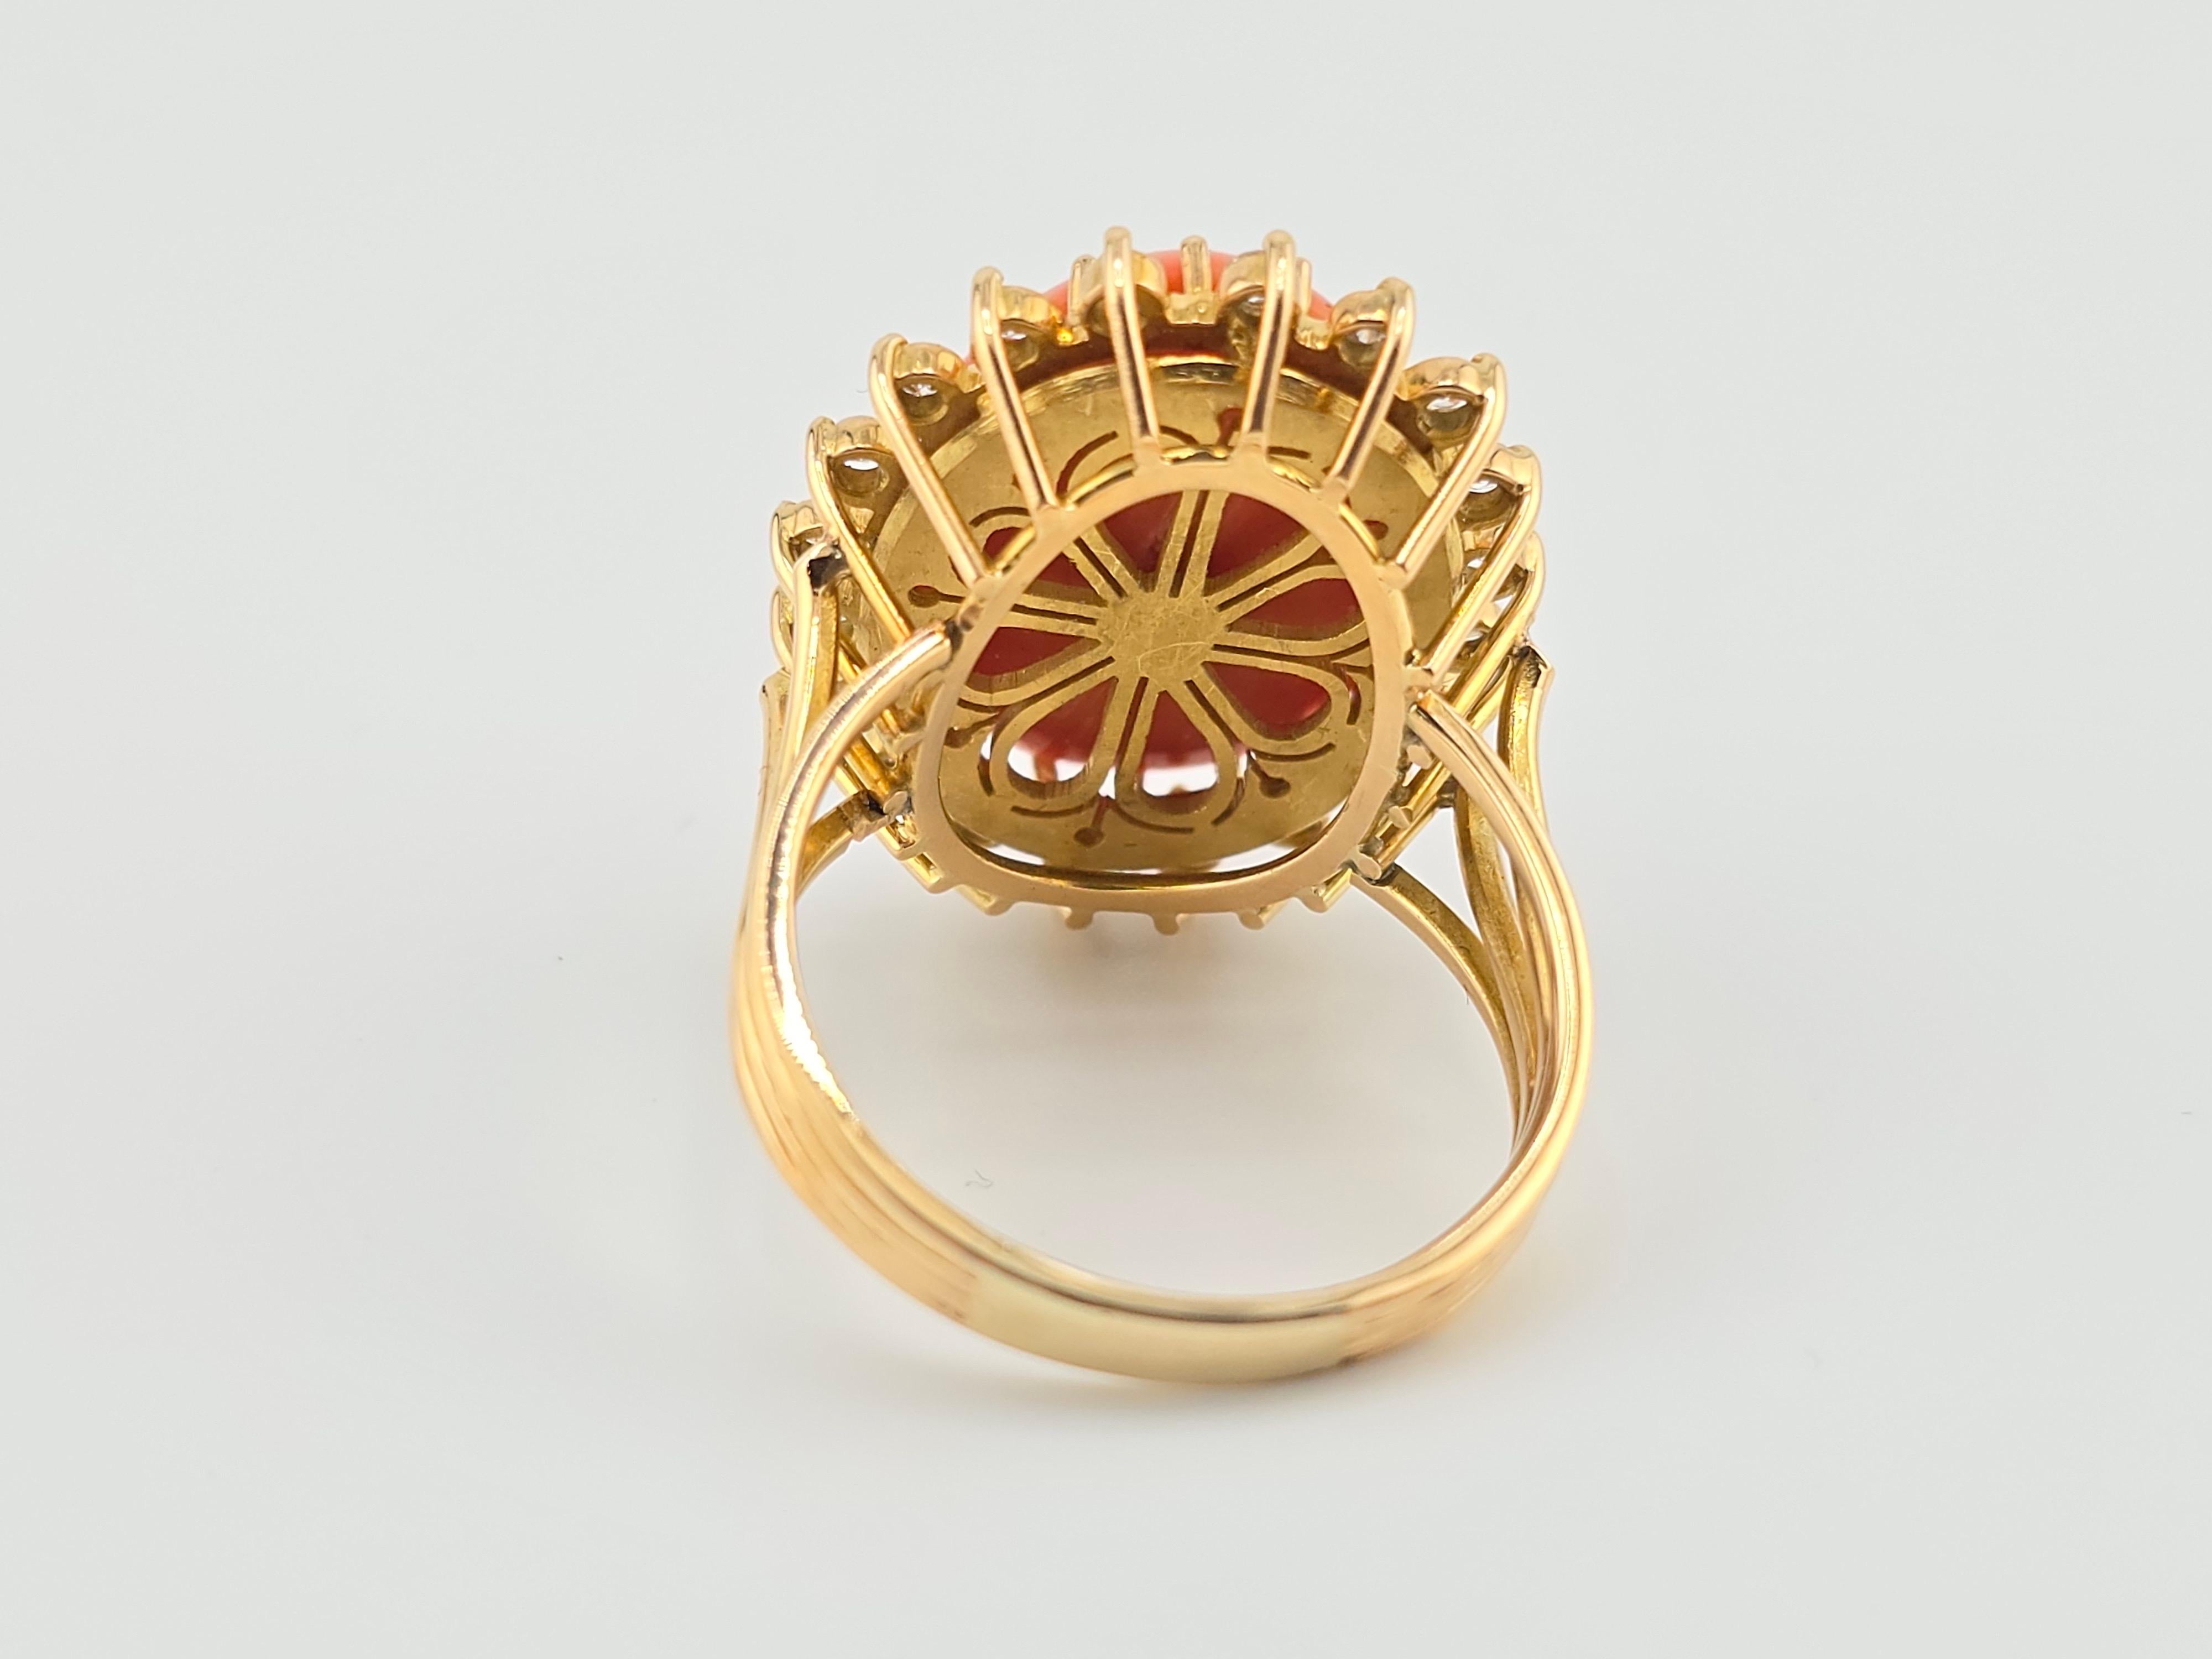 Round Cut Marvelous Italian Momo Coral 14K Yellow Gold Ring Surrounded With Diamonds  For Sale